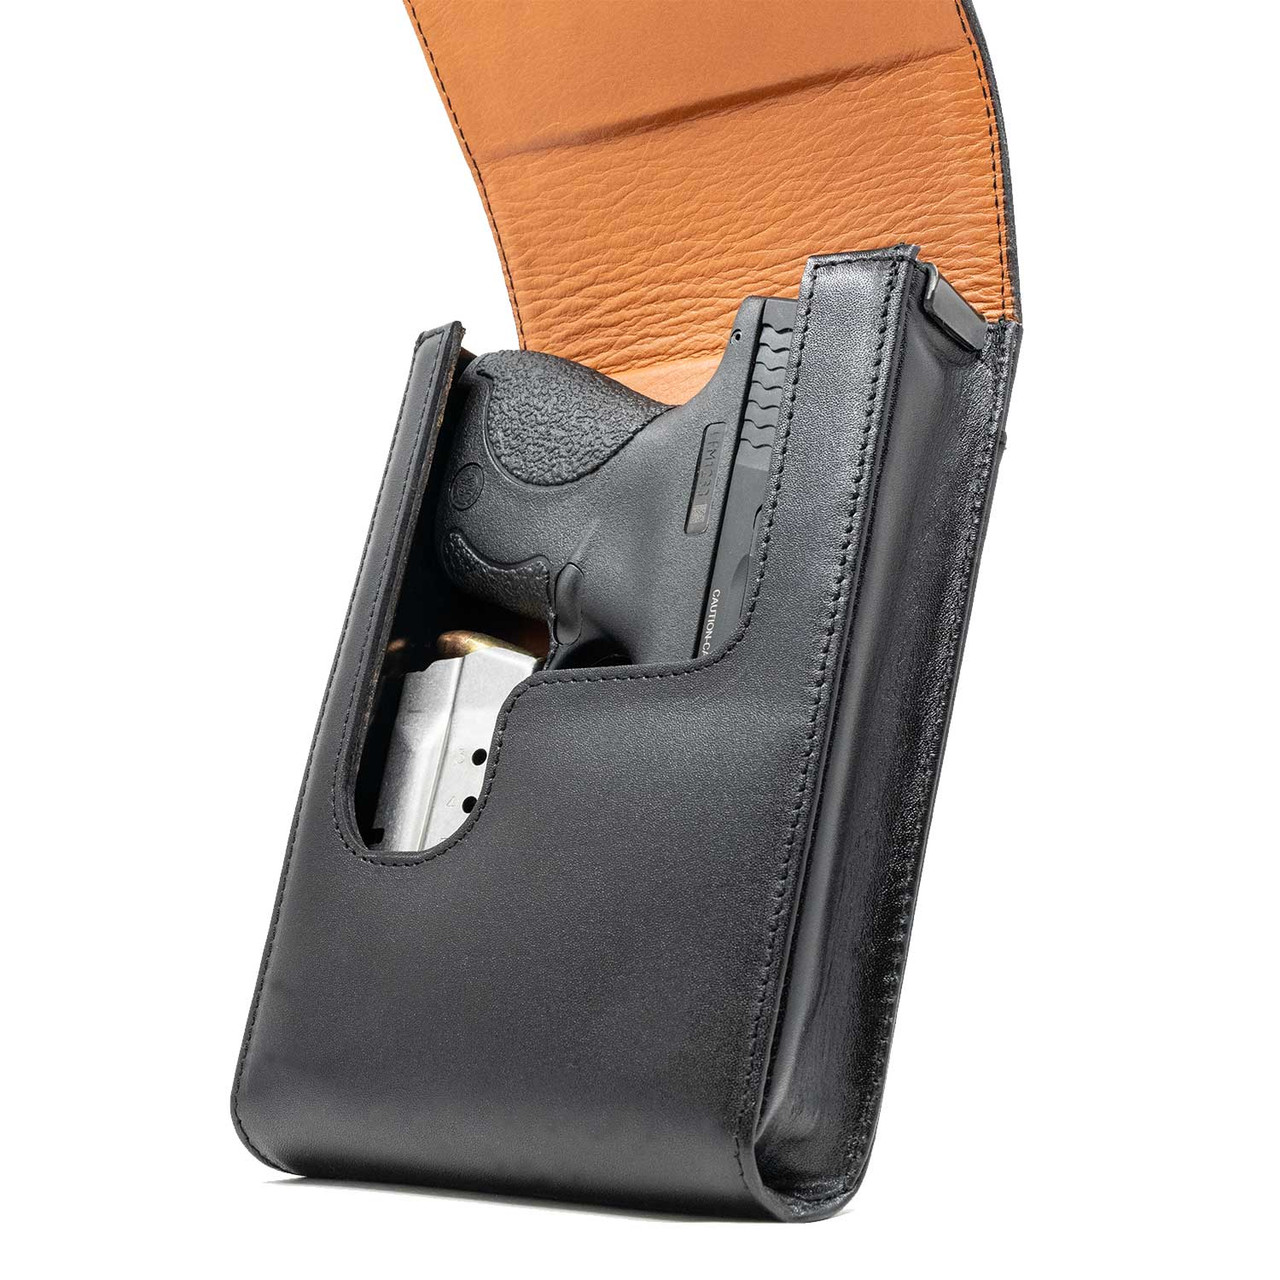 The Ruger LCP II Xtra Mag Black Leather Holster